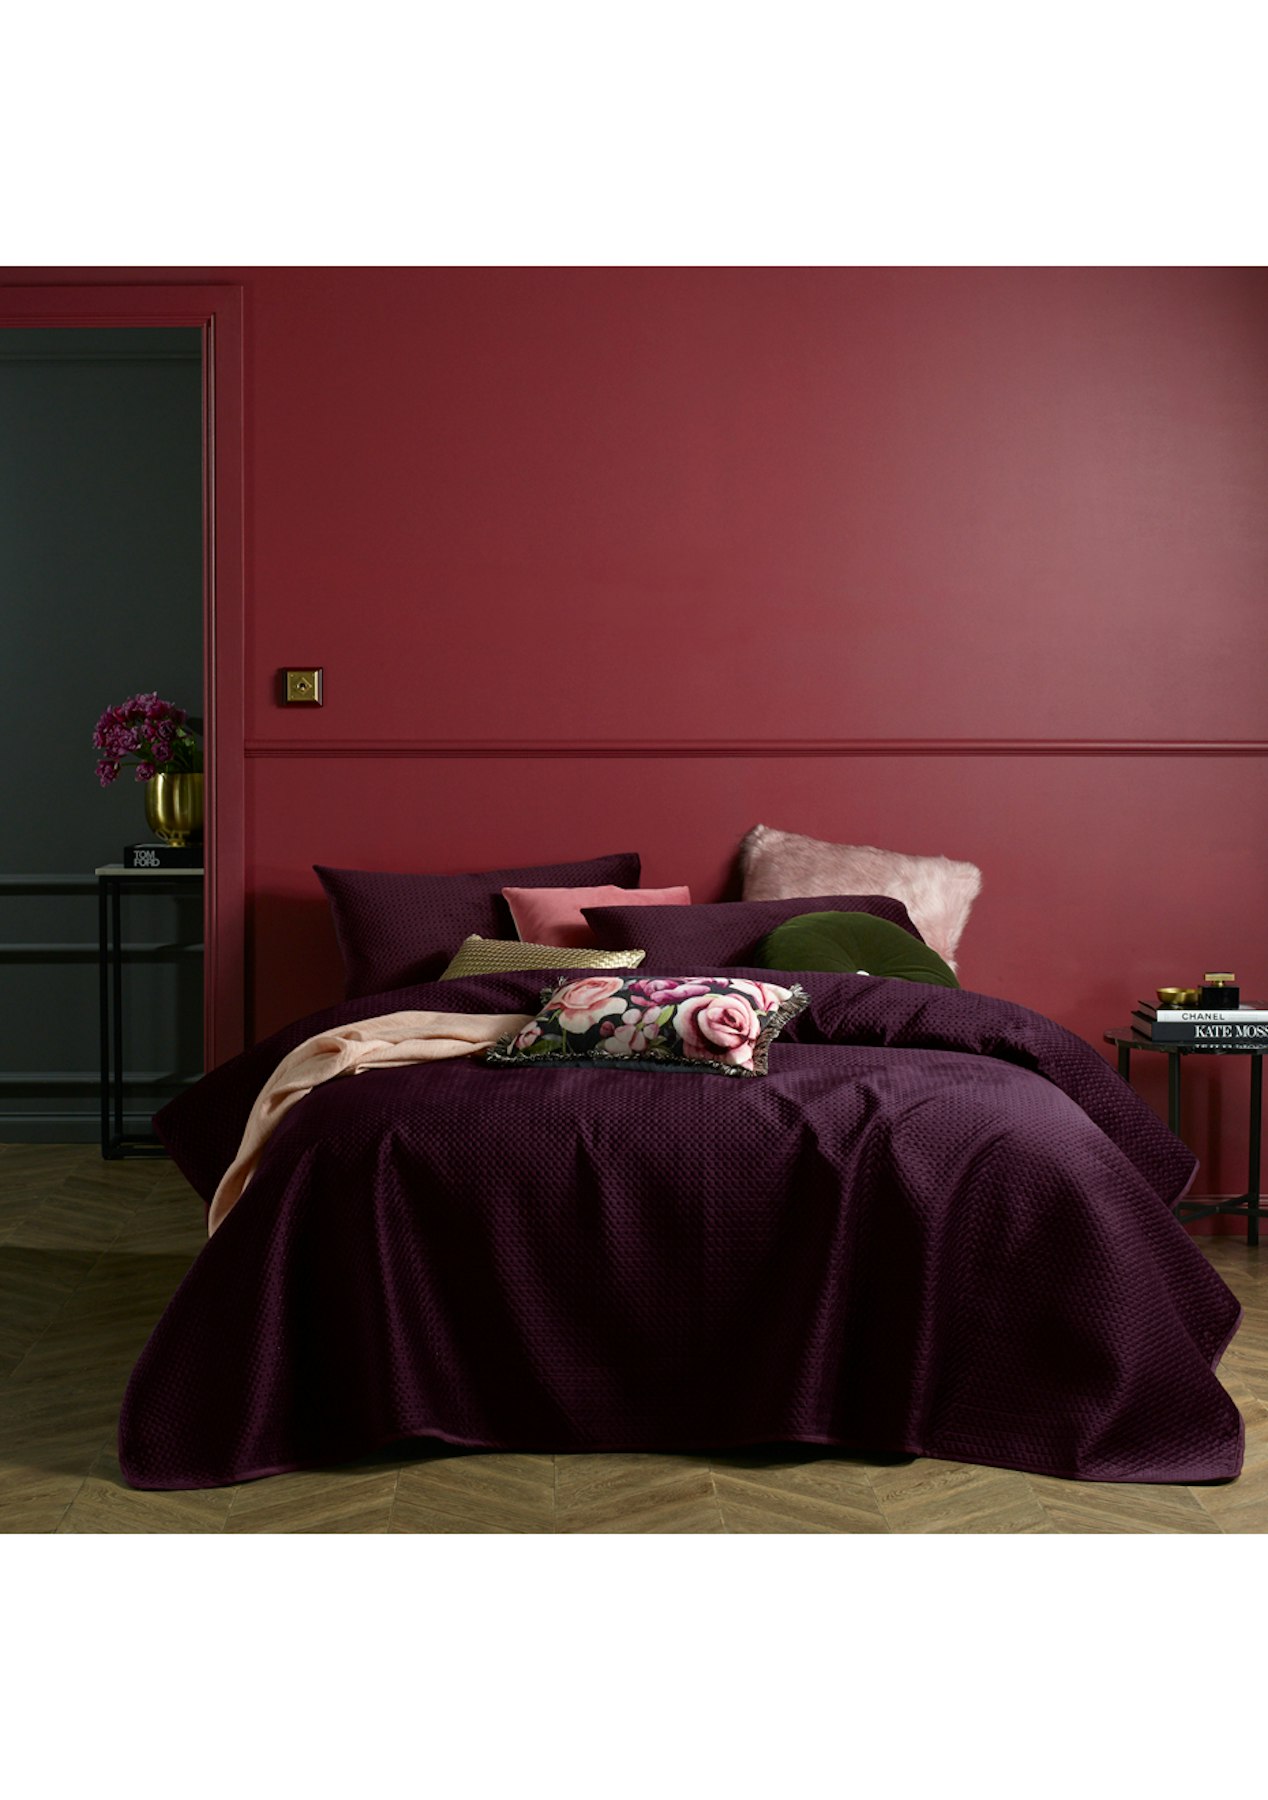 Accessorize Coco Velvet Purple Coverlet Set King Bed The